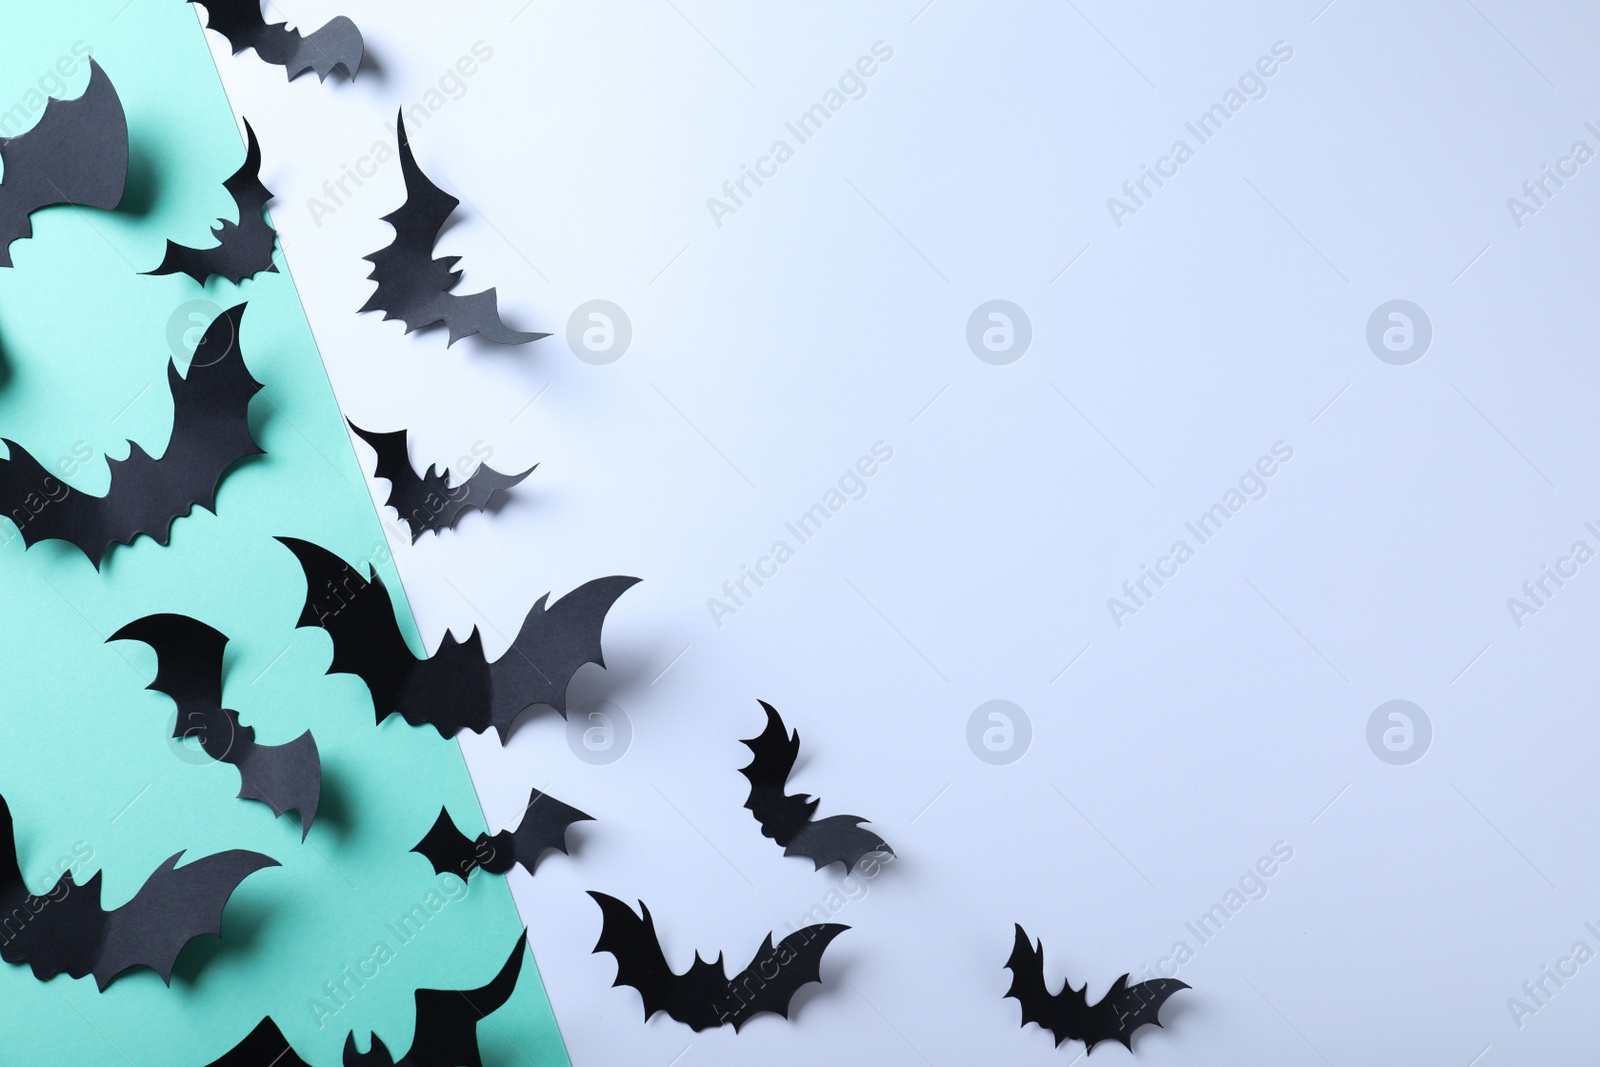 Photo of Many black paper bats on color background, flat lay with space for text. Halloween decor